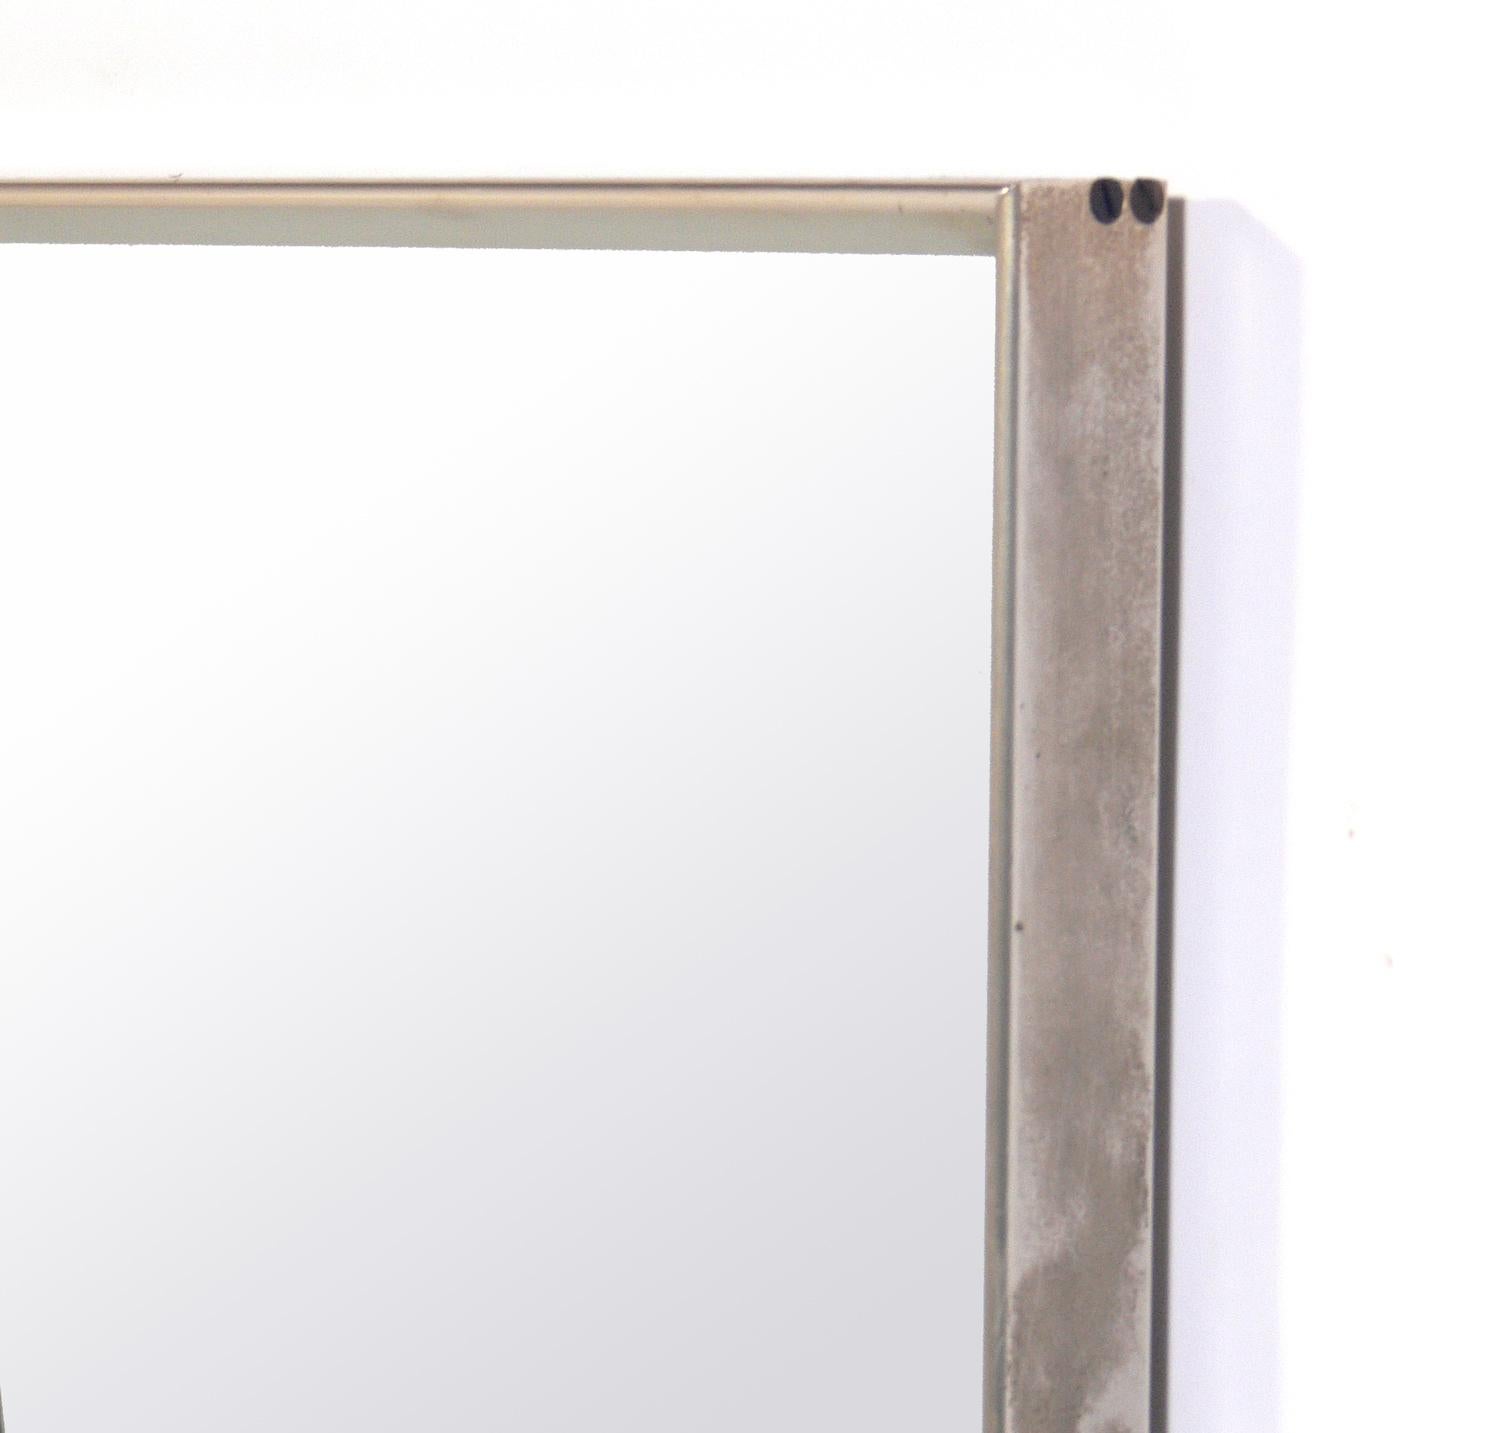 Clean lined nickel midcentury mirror, American, circa 1950s. Clean lined design with nice attention to detail, including interesting corner joinery. Retains warm original patina.